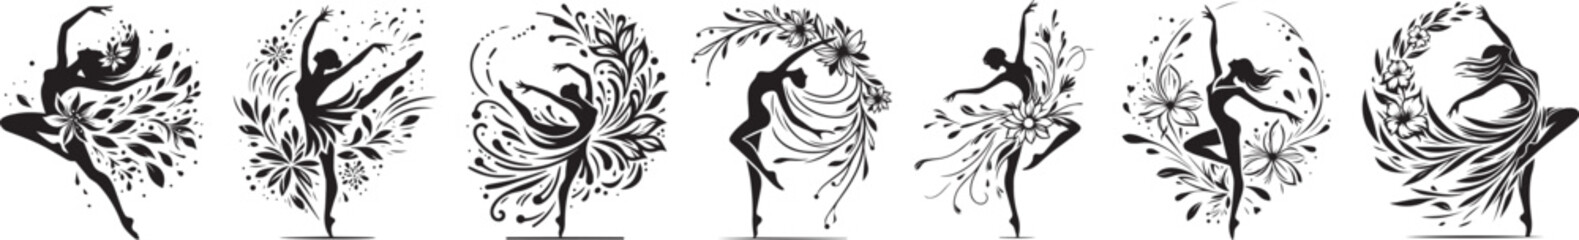 ballet dancers adorned with flowers and leaves, elegant performance, black vector graphic